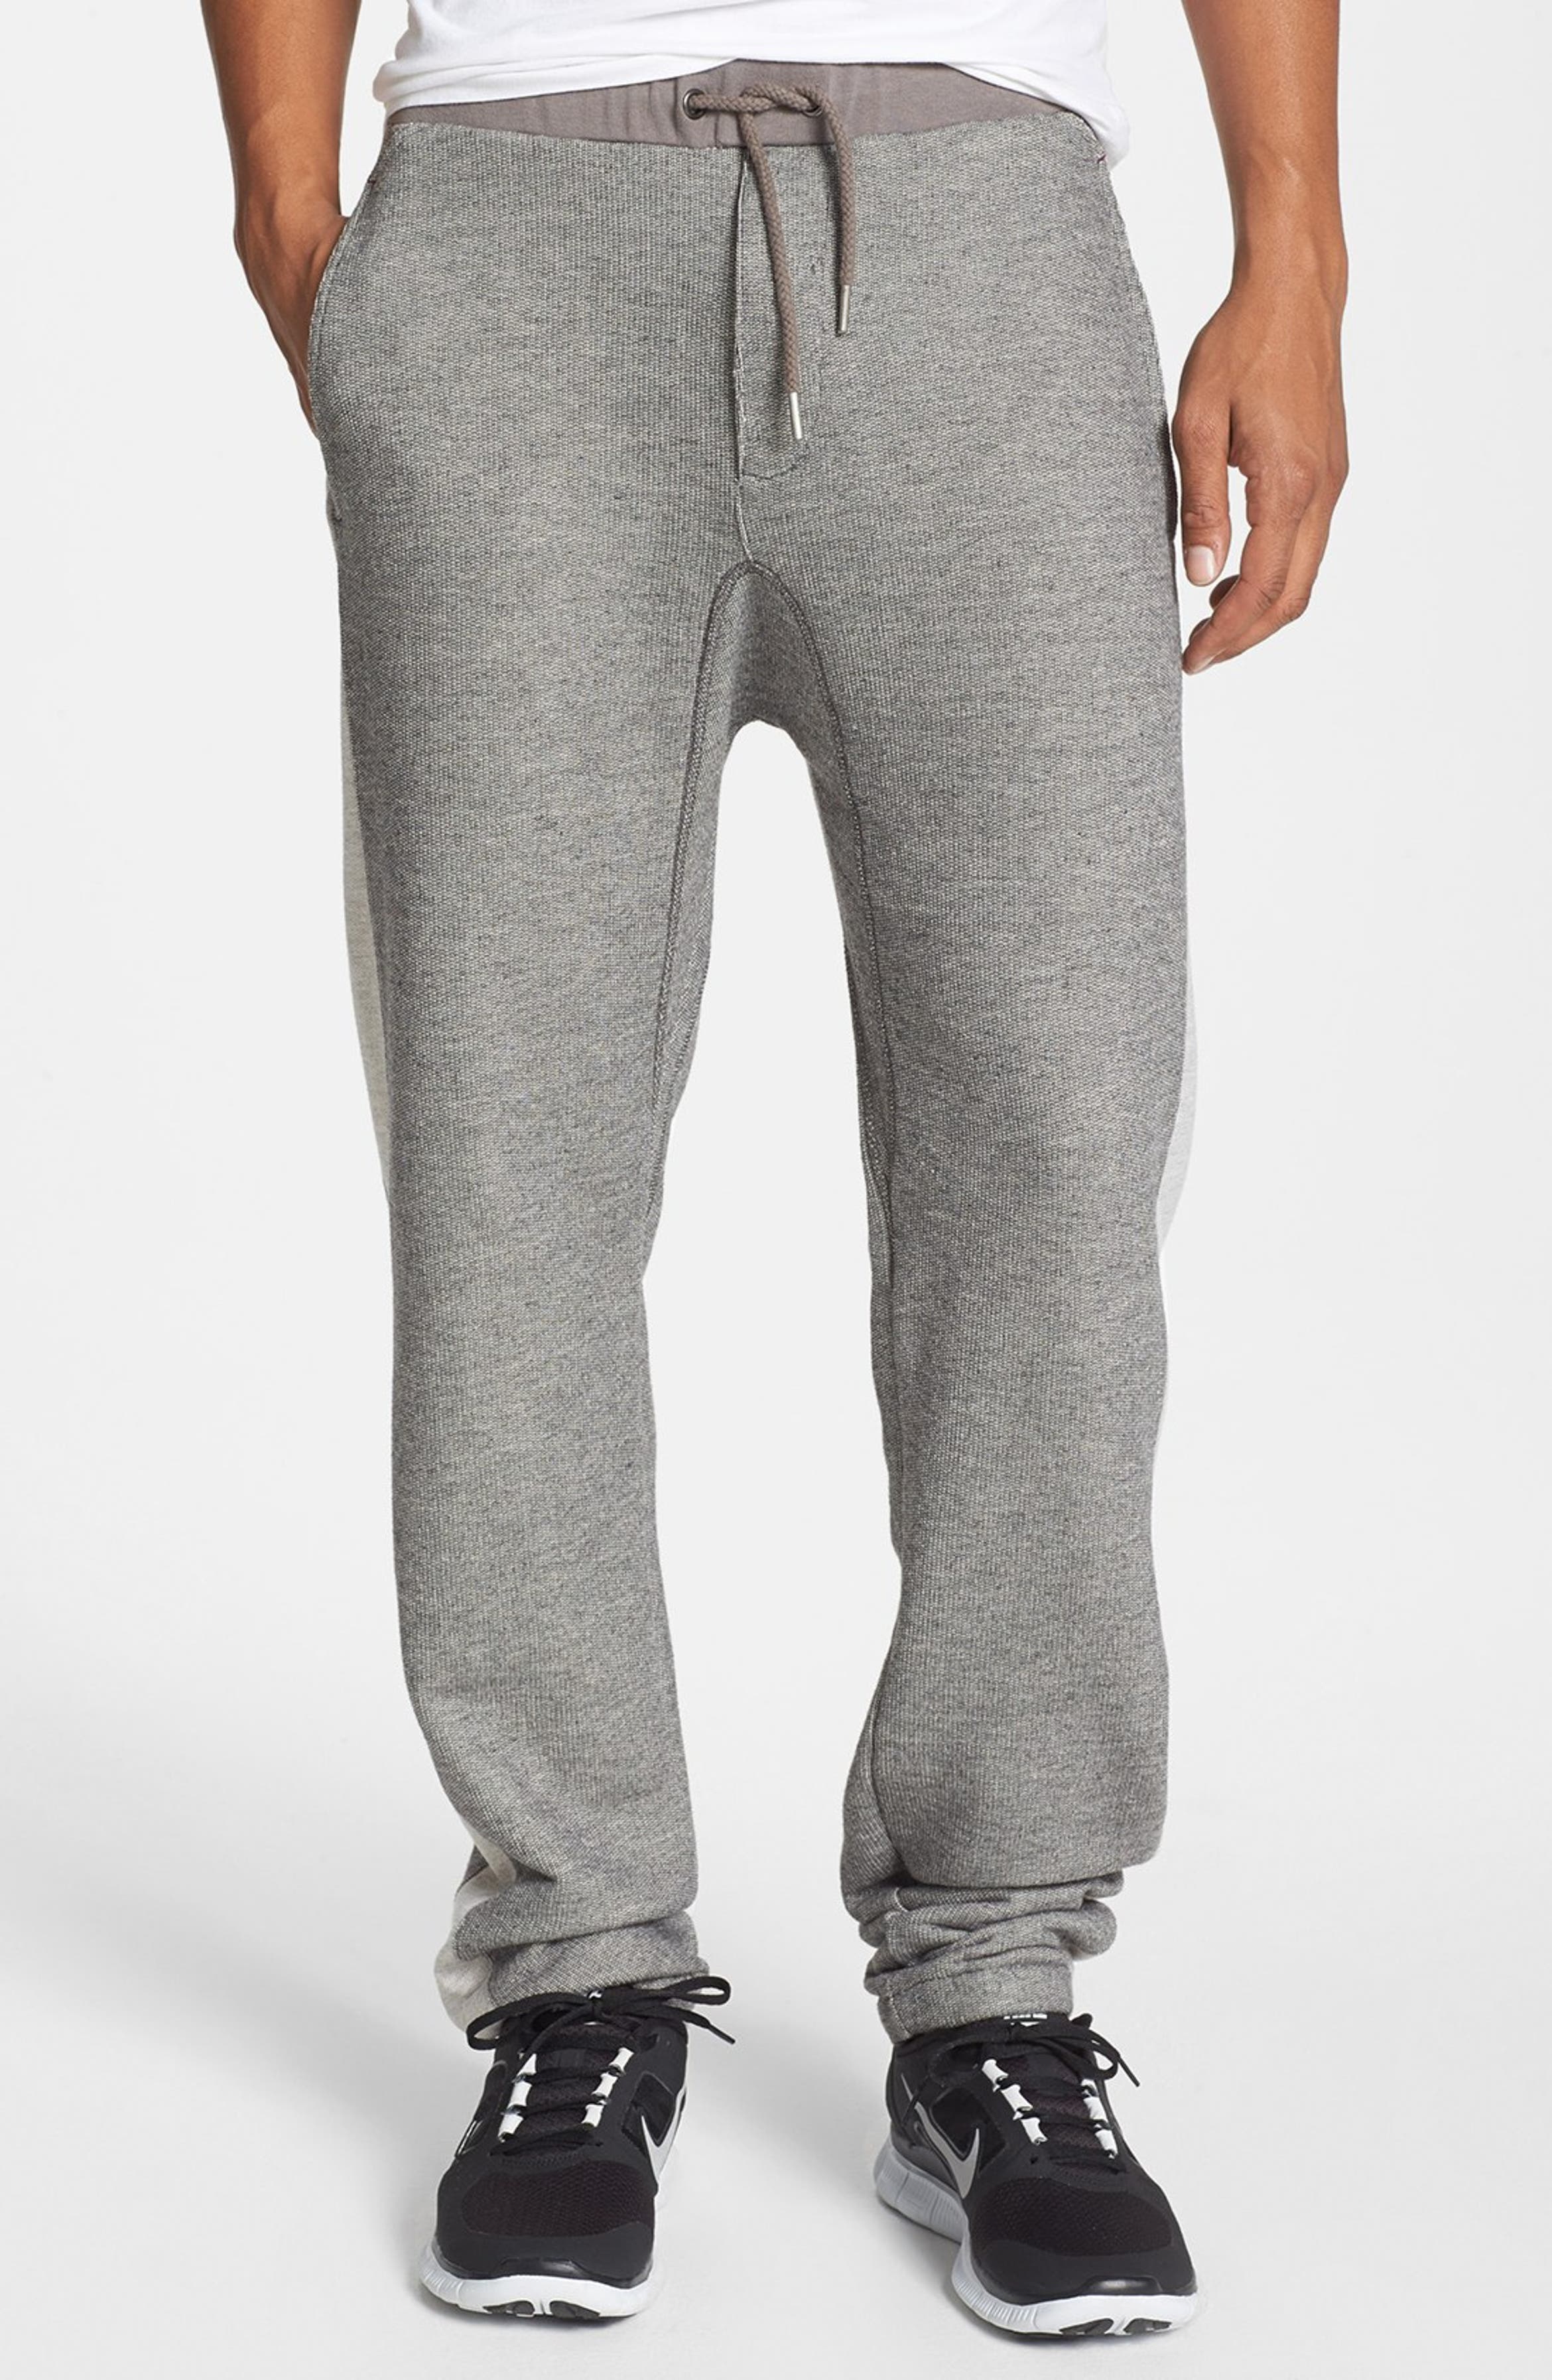 Second Sunday 'Ground' Jogger Pants | Nordstrom